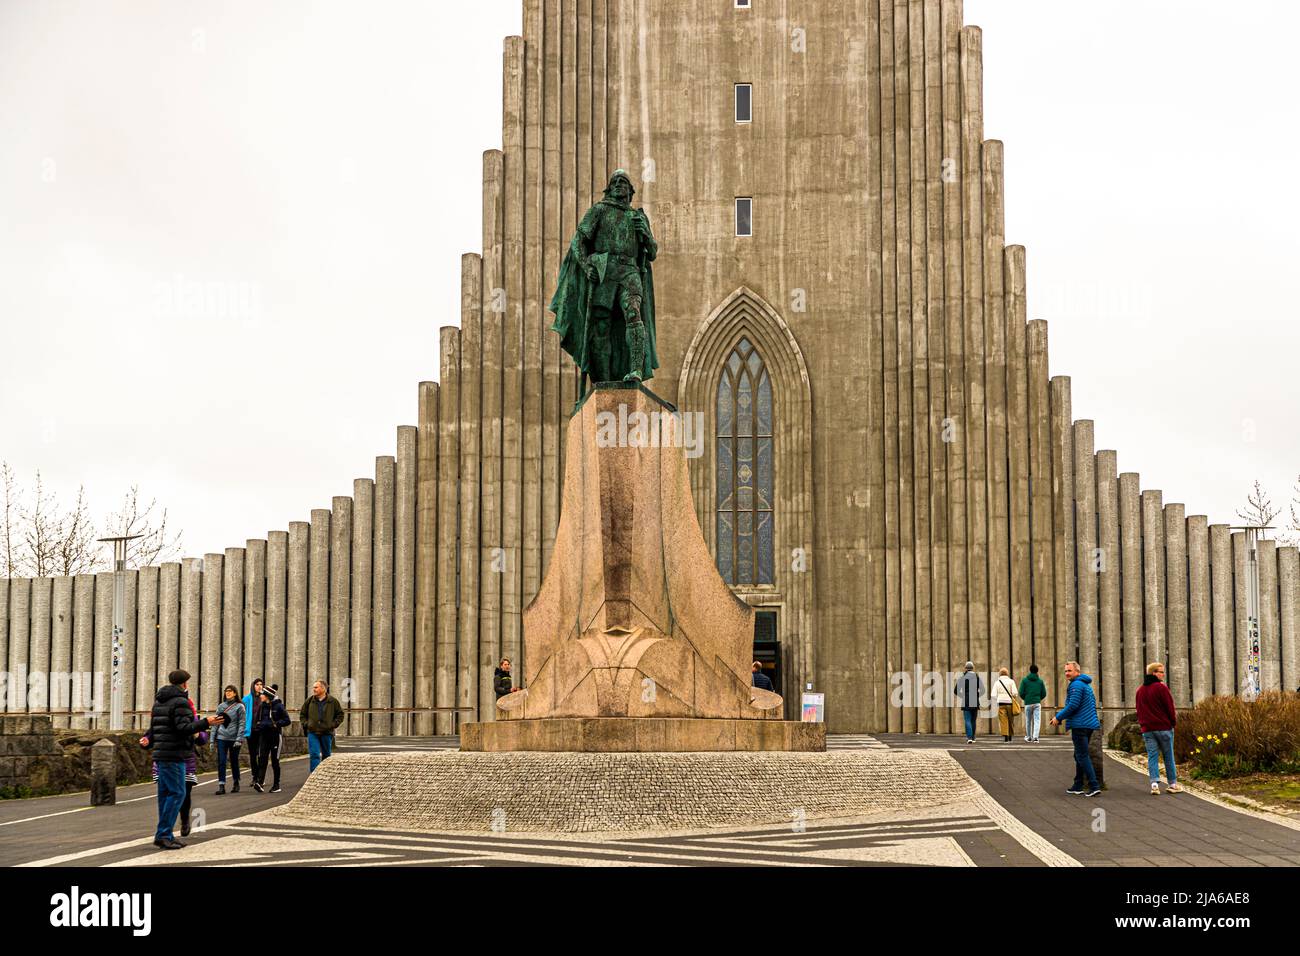 The statue of Leifur Eiríksson (who is known in English as Leif Eriksson) was a gift from the United States to Iceland to commemorate the 1000 year anniversary of Alþingi, the parliament of Iceland. Reykjavik, Iceland Stock Photo